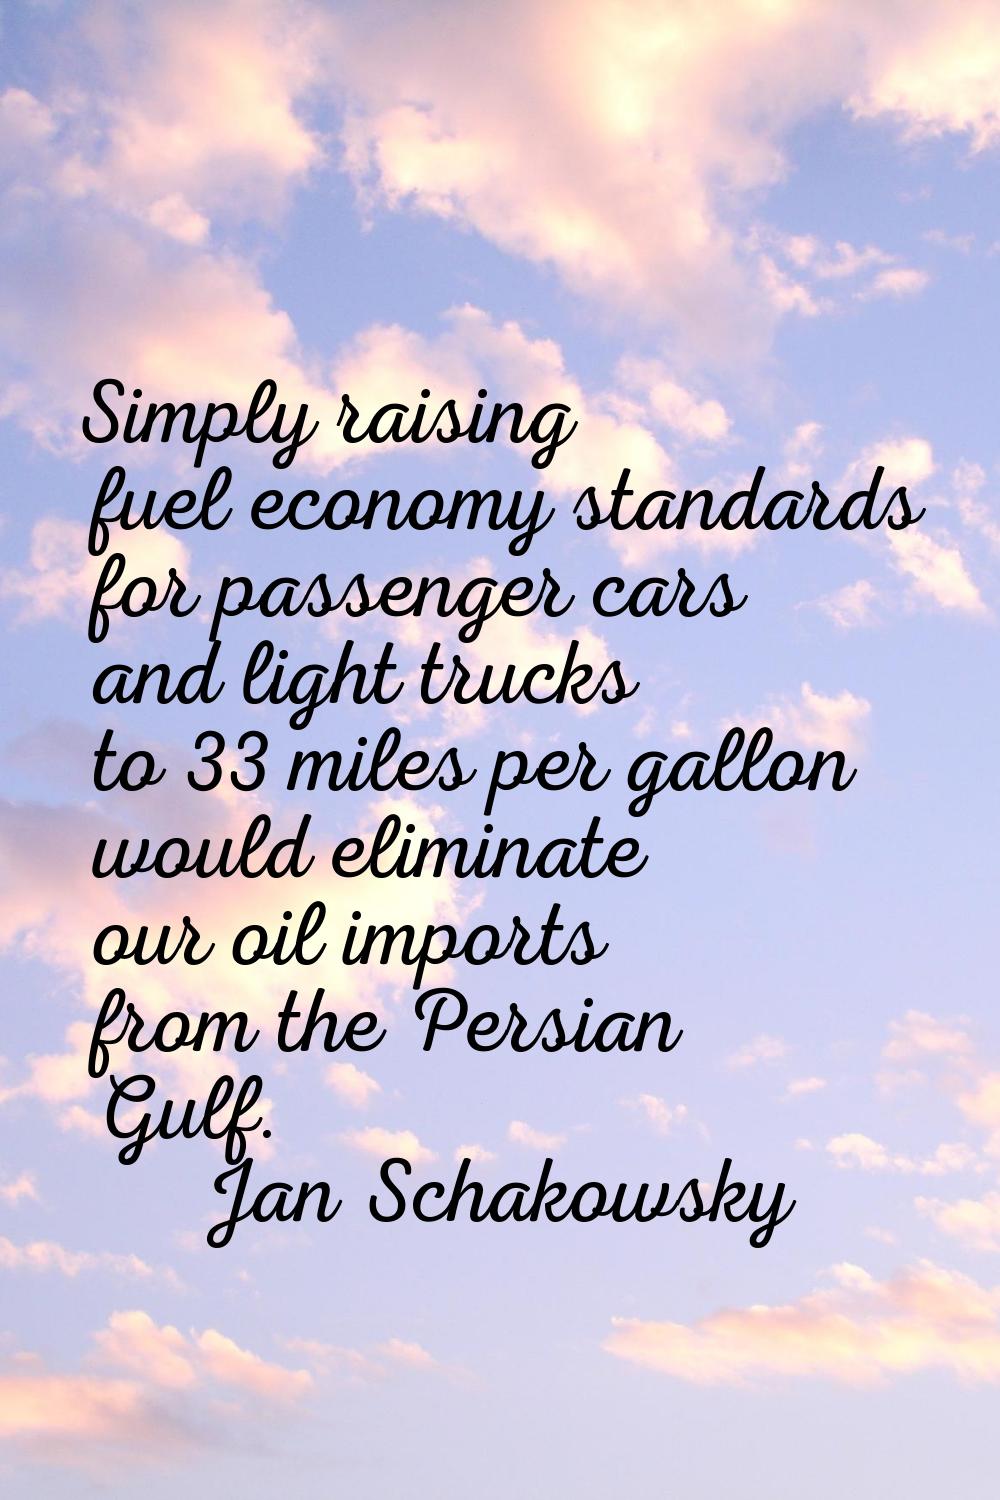 Simply raising fuel economy standards for passenger cars and light trucks to 33 miles per gallon wo